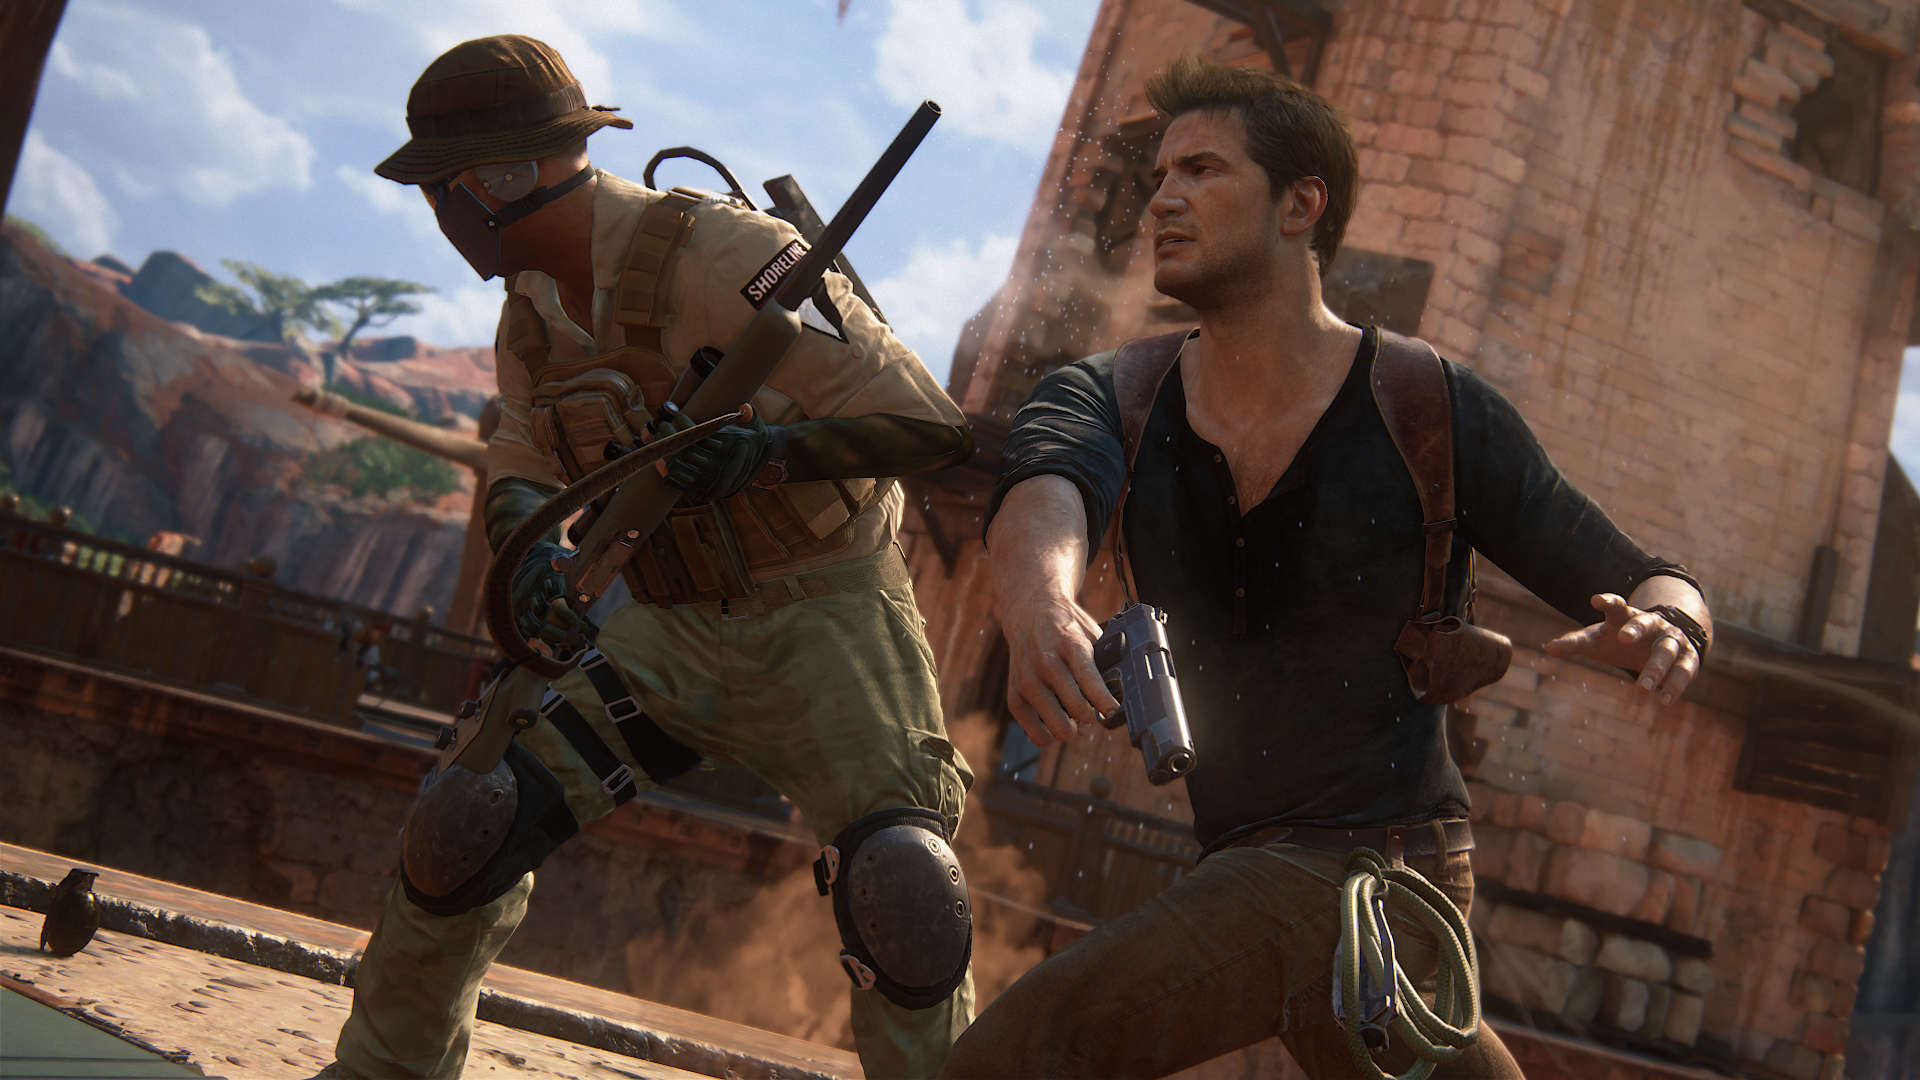 Uncharted 4: A Thief's End is a Hollywood blockbuster in video game form